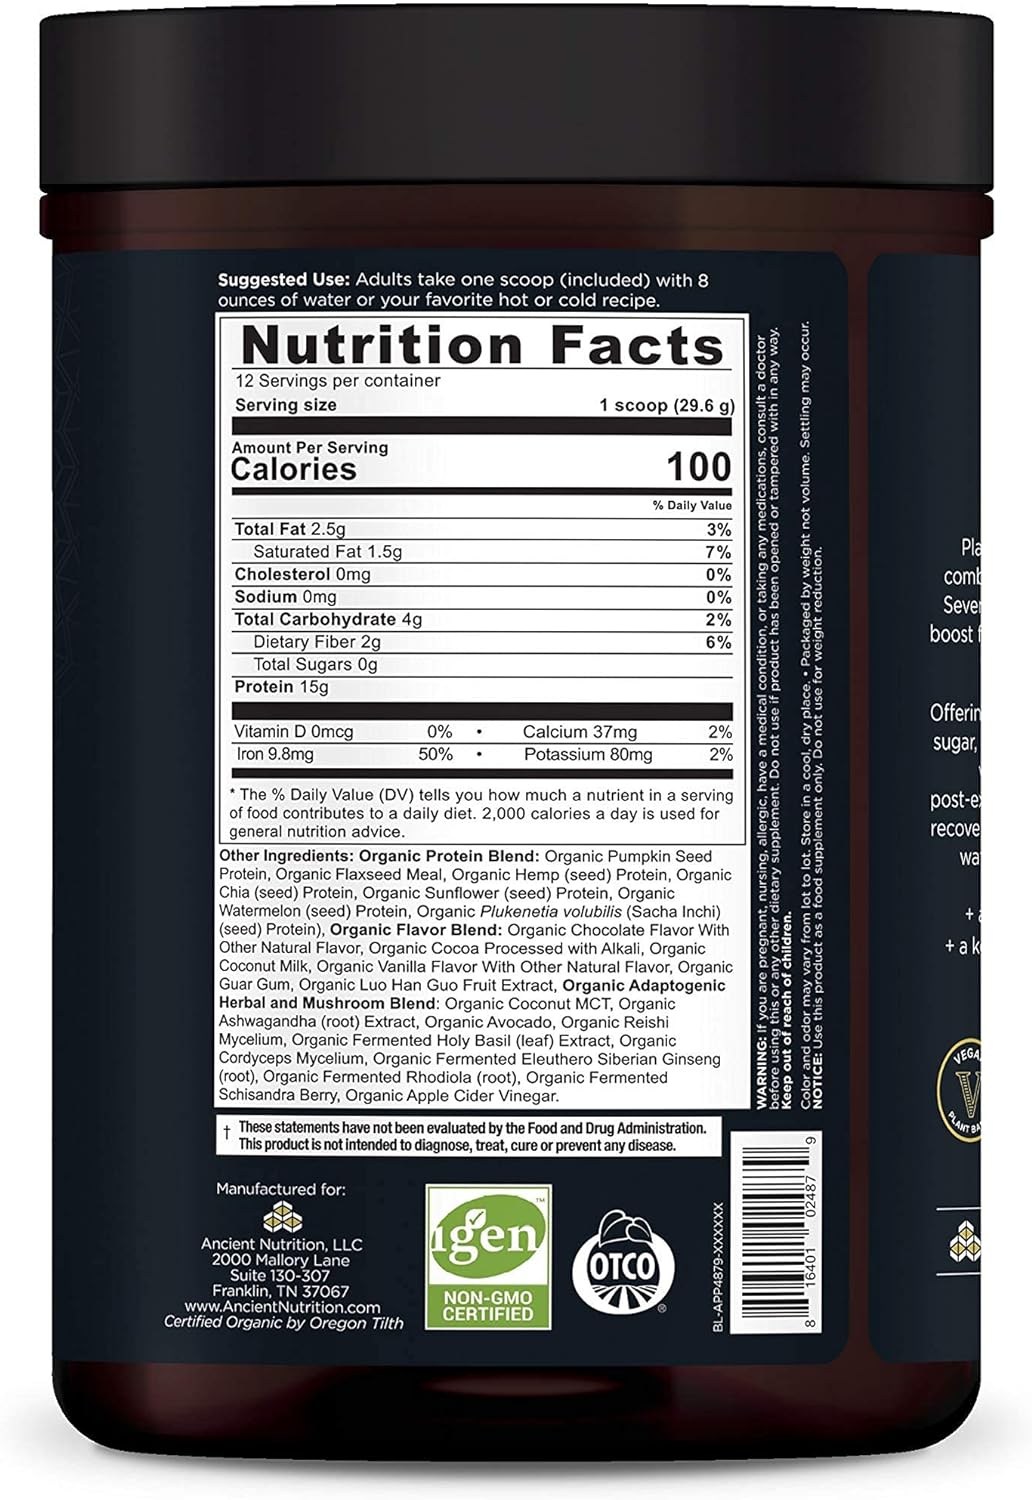 Ancient Nutrition Plant Protein+ | Powder Chocolate (12 Servings)